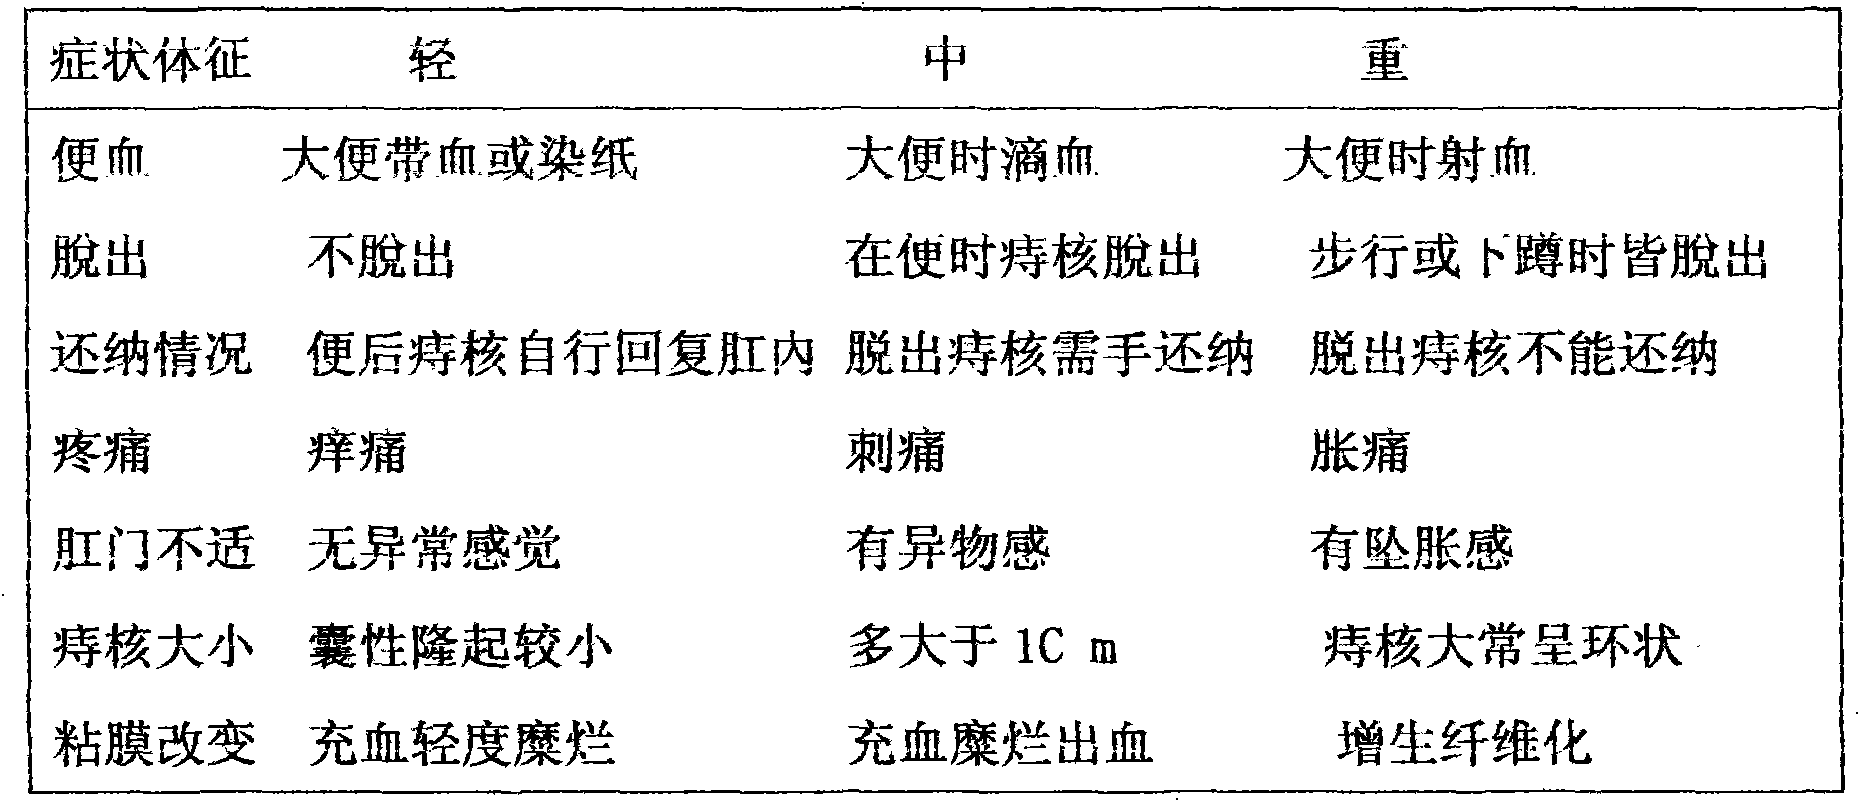 Traditional Chinese medicine preparations of ointment, suppository and lotion containing pseudo-ginseng, rhubarb, rhizome of Chinese goldthread and cortex phellodendri and for treating hemorrhoid